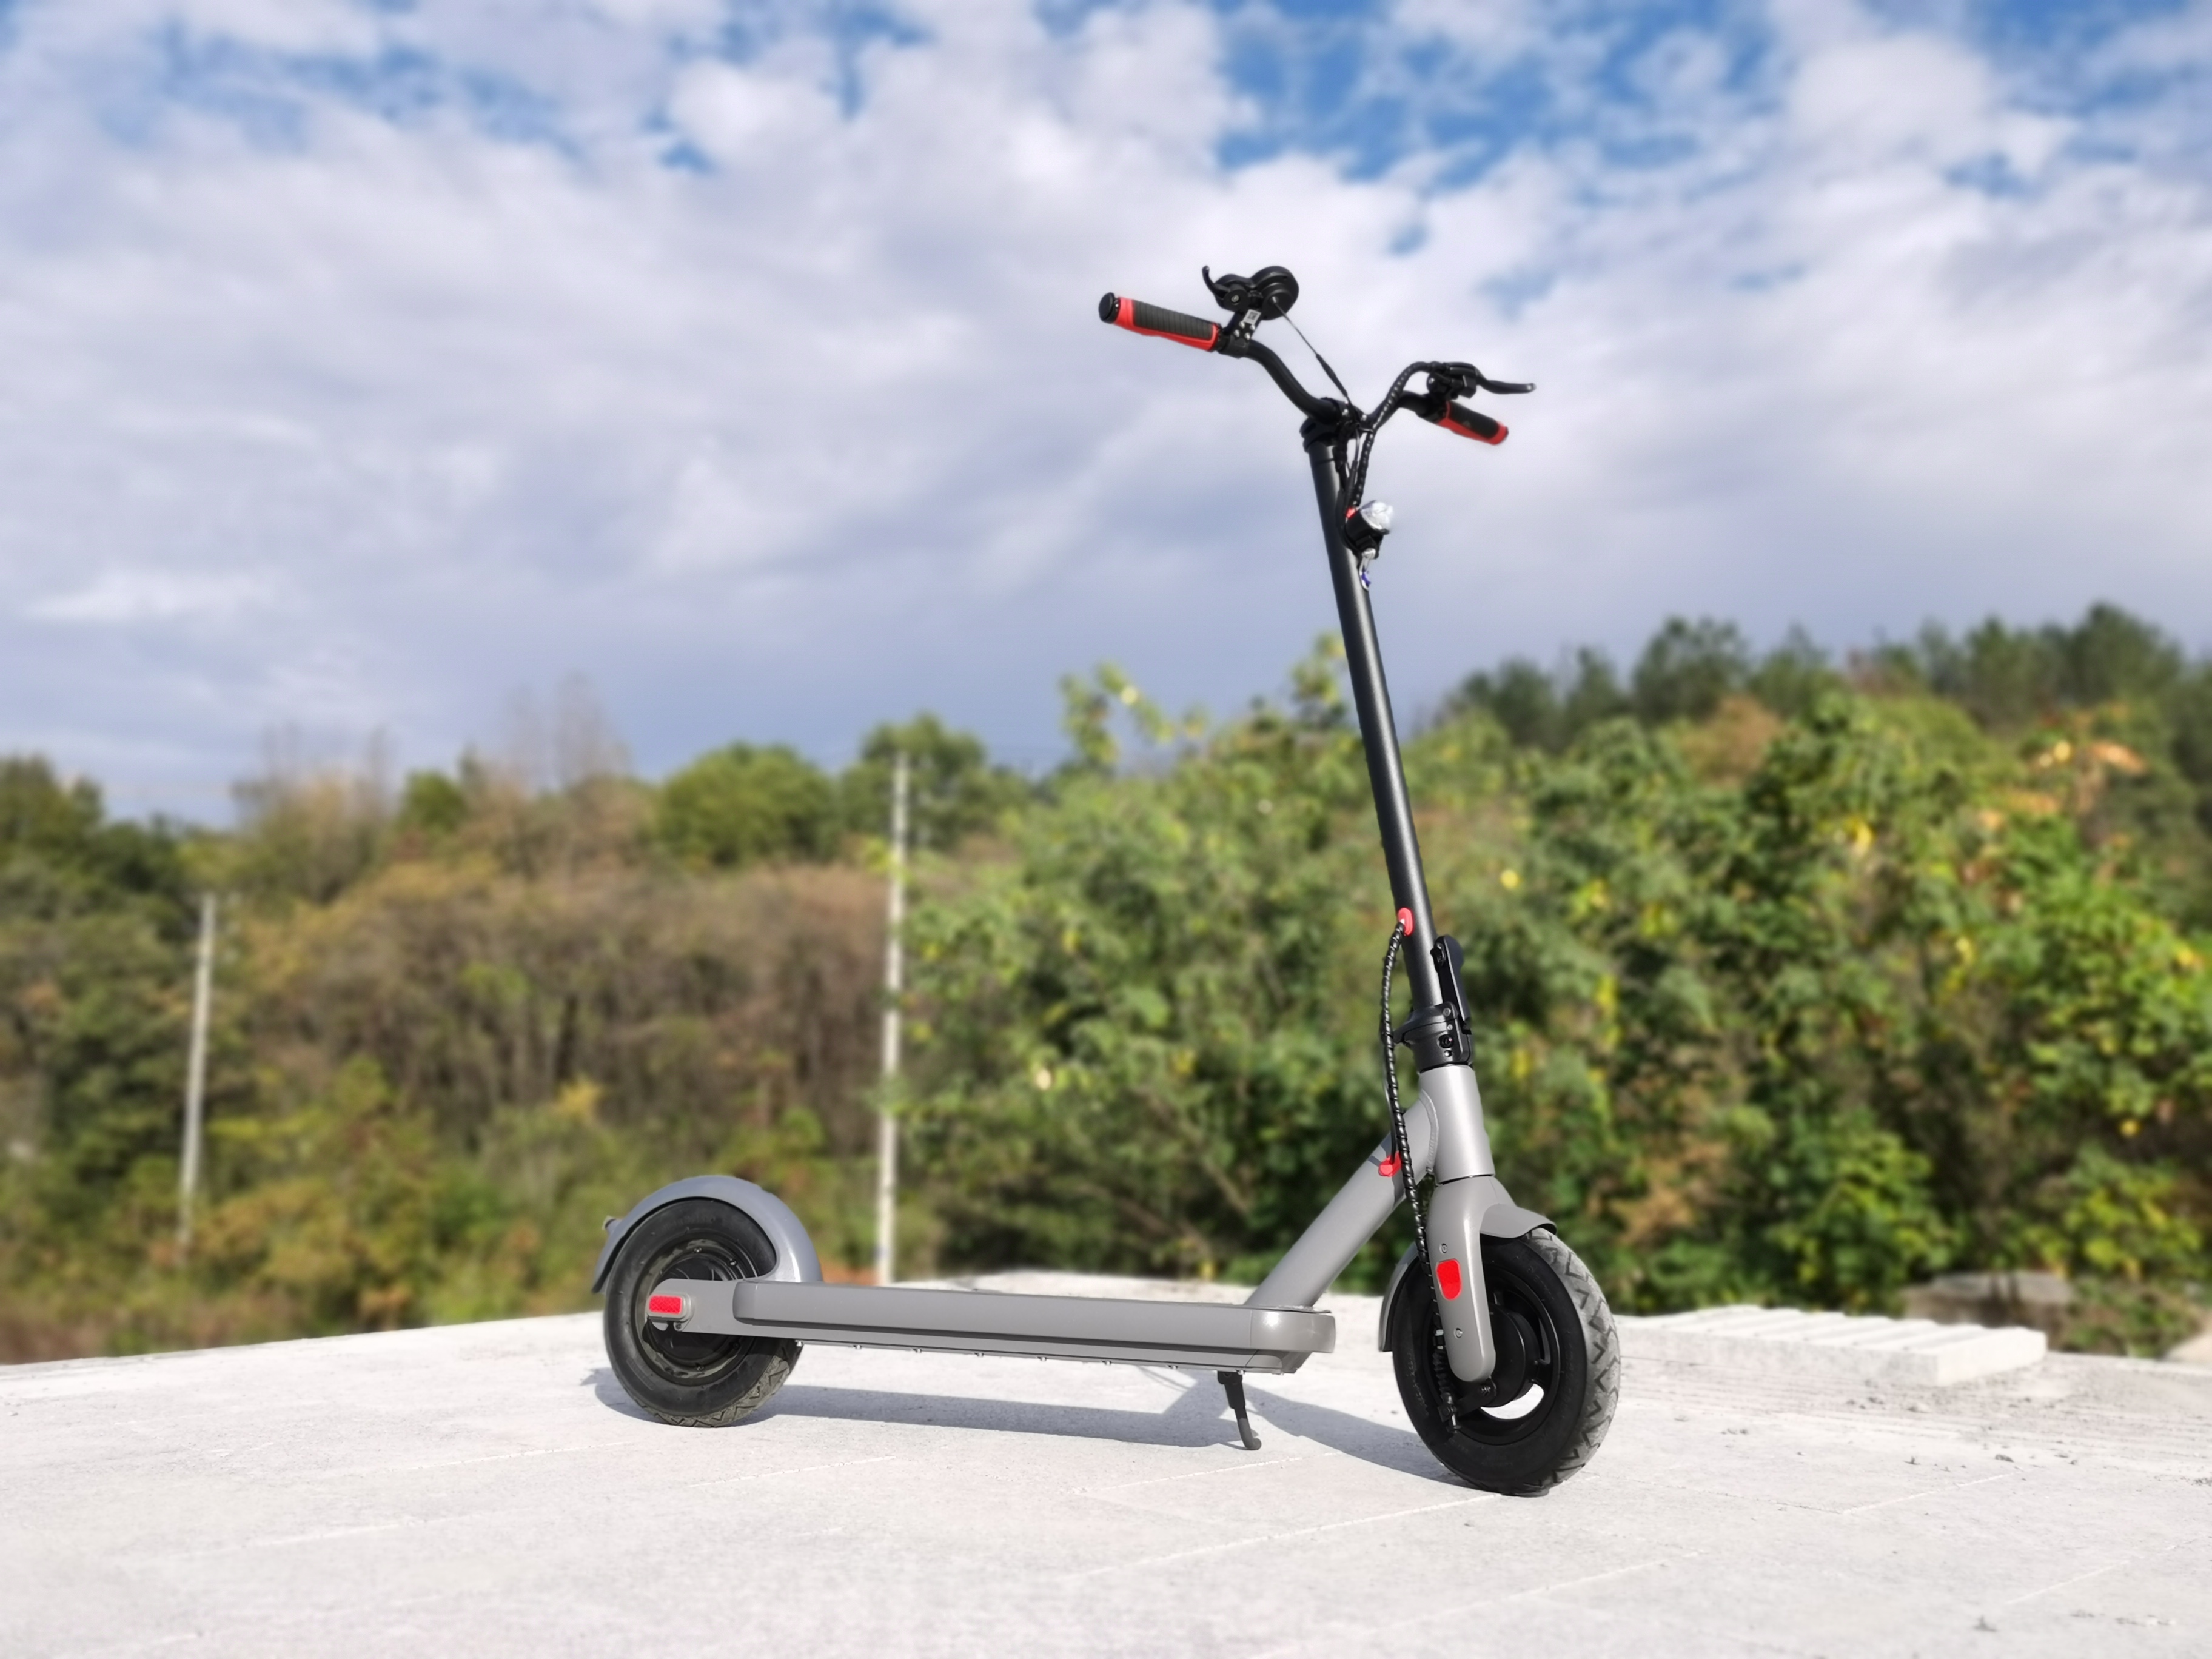 Summary of the advantages and disadvantages of electric scooters